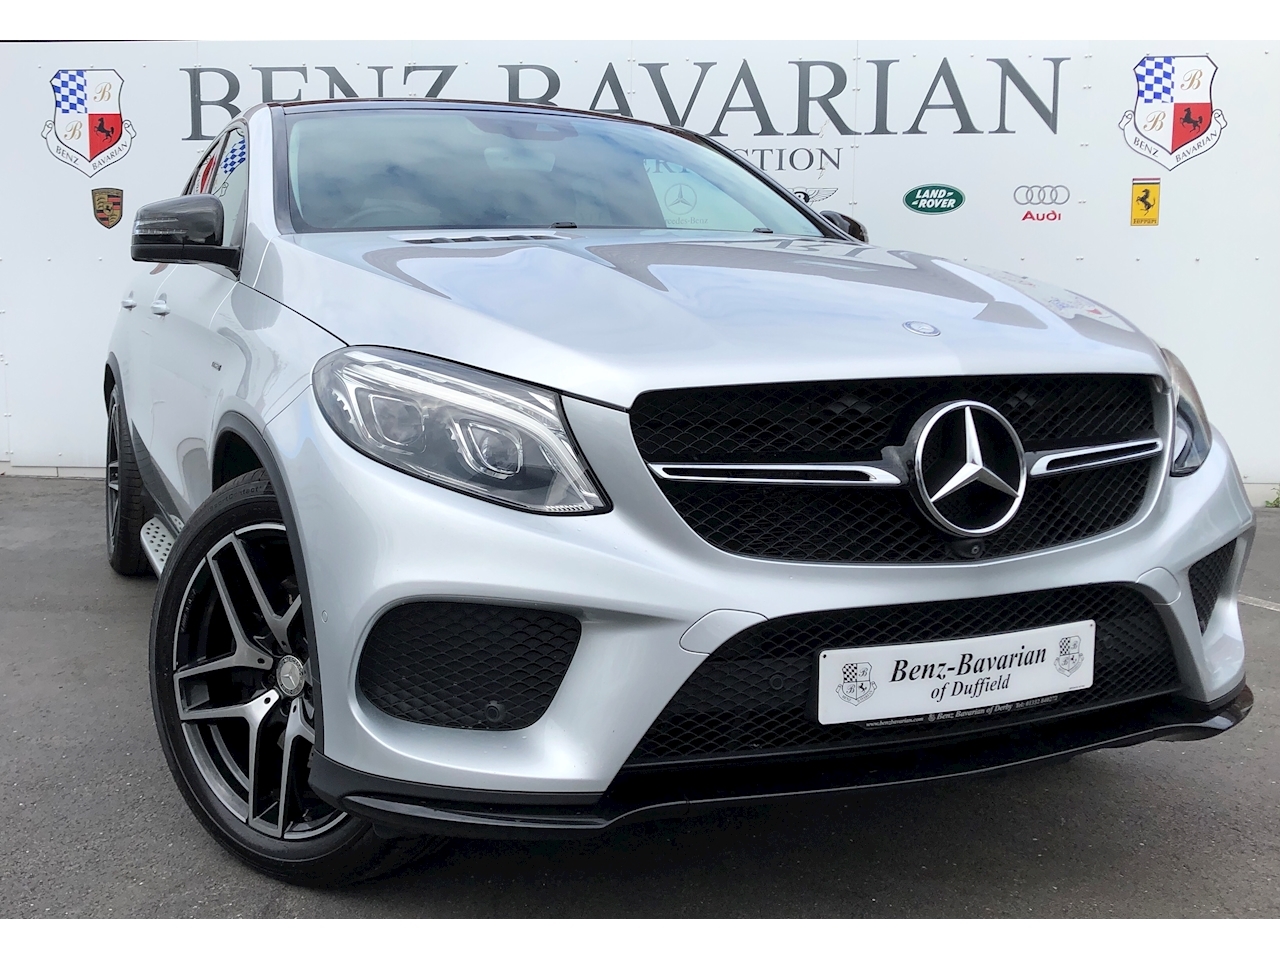 3.0 GLE450 V6 AMG (Premium) Coupe 5dr Petrol G-Tronic 4MATIC (s/s) (367 ps)